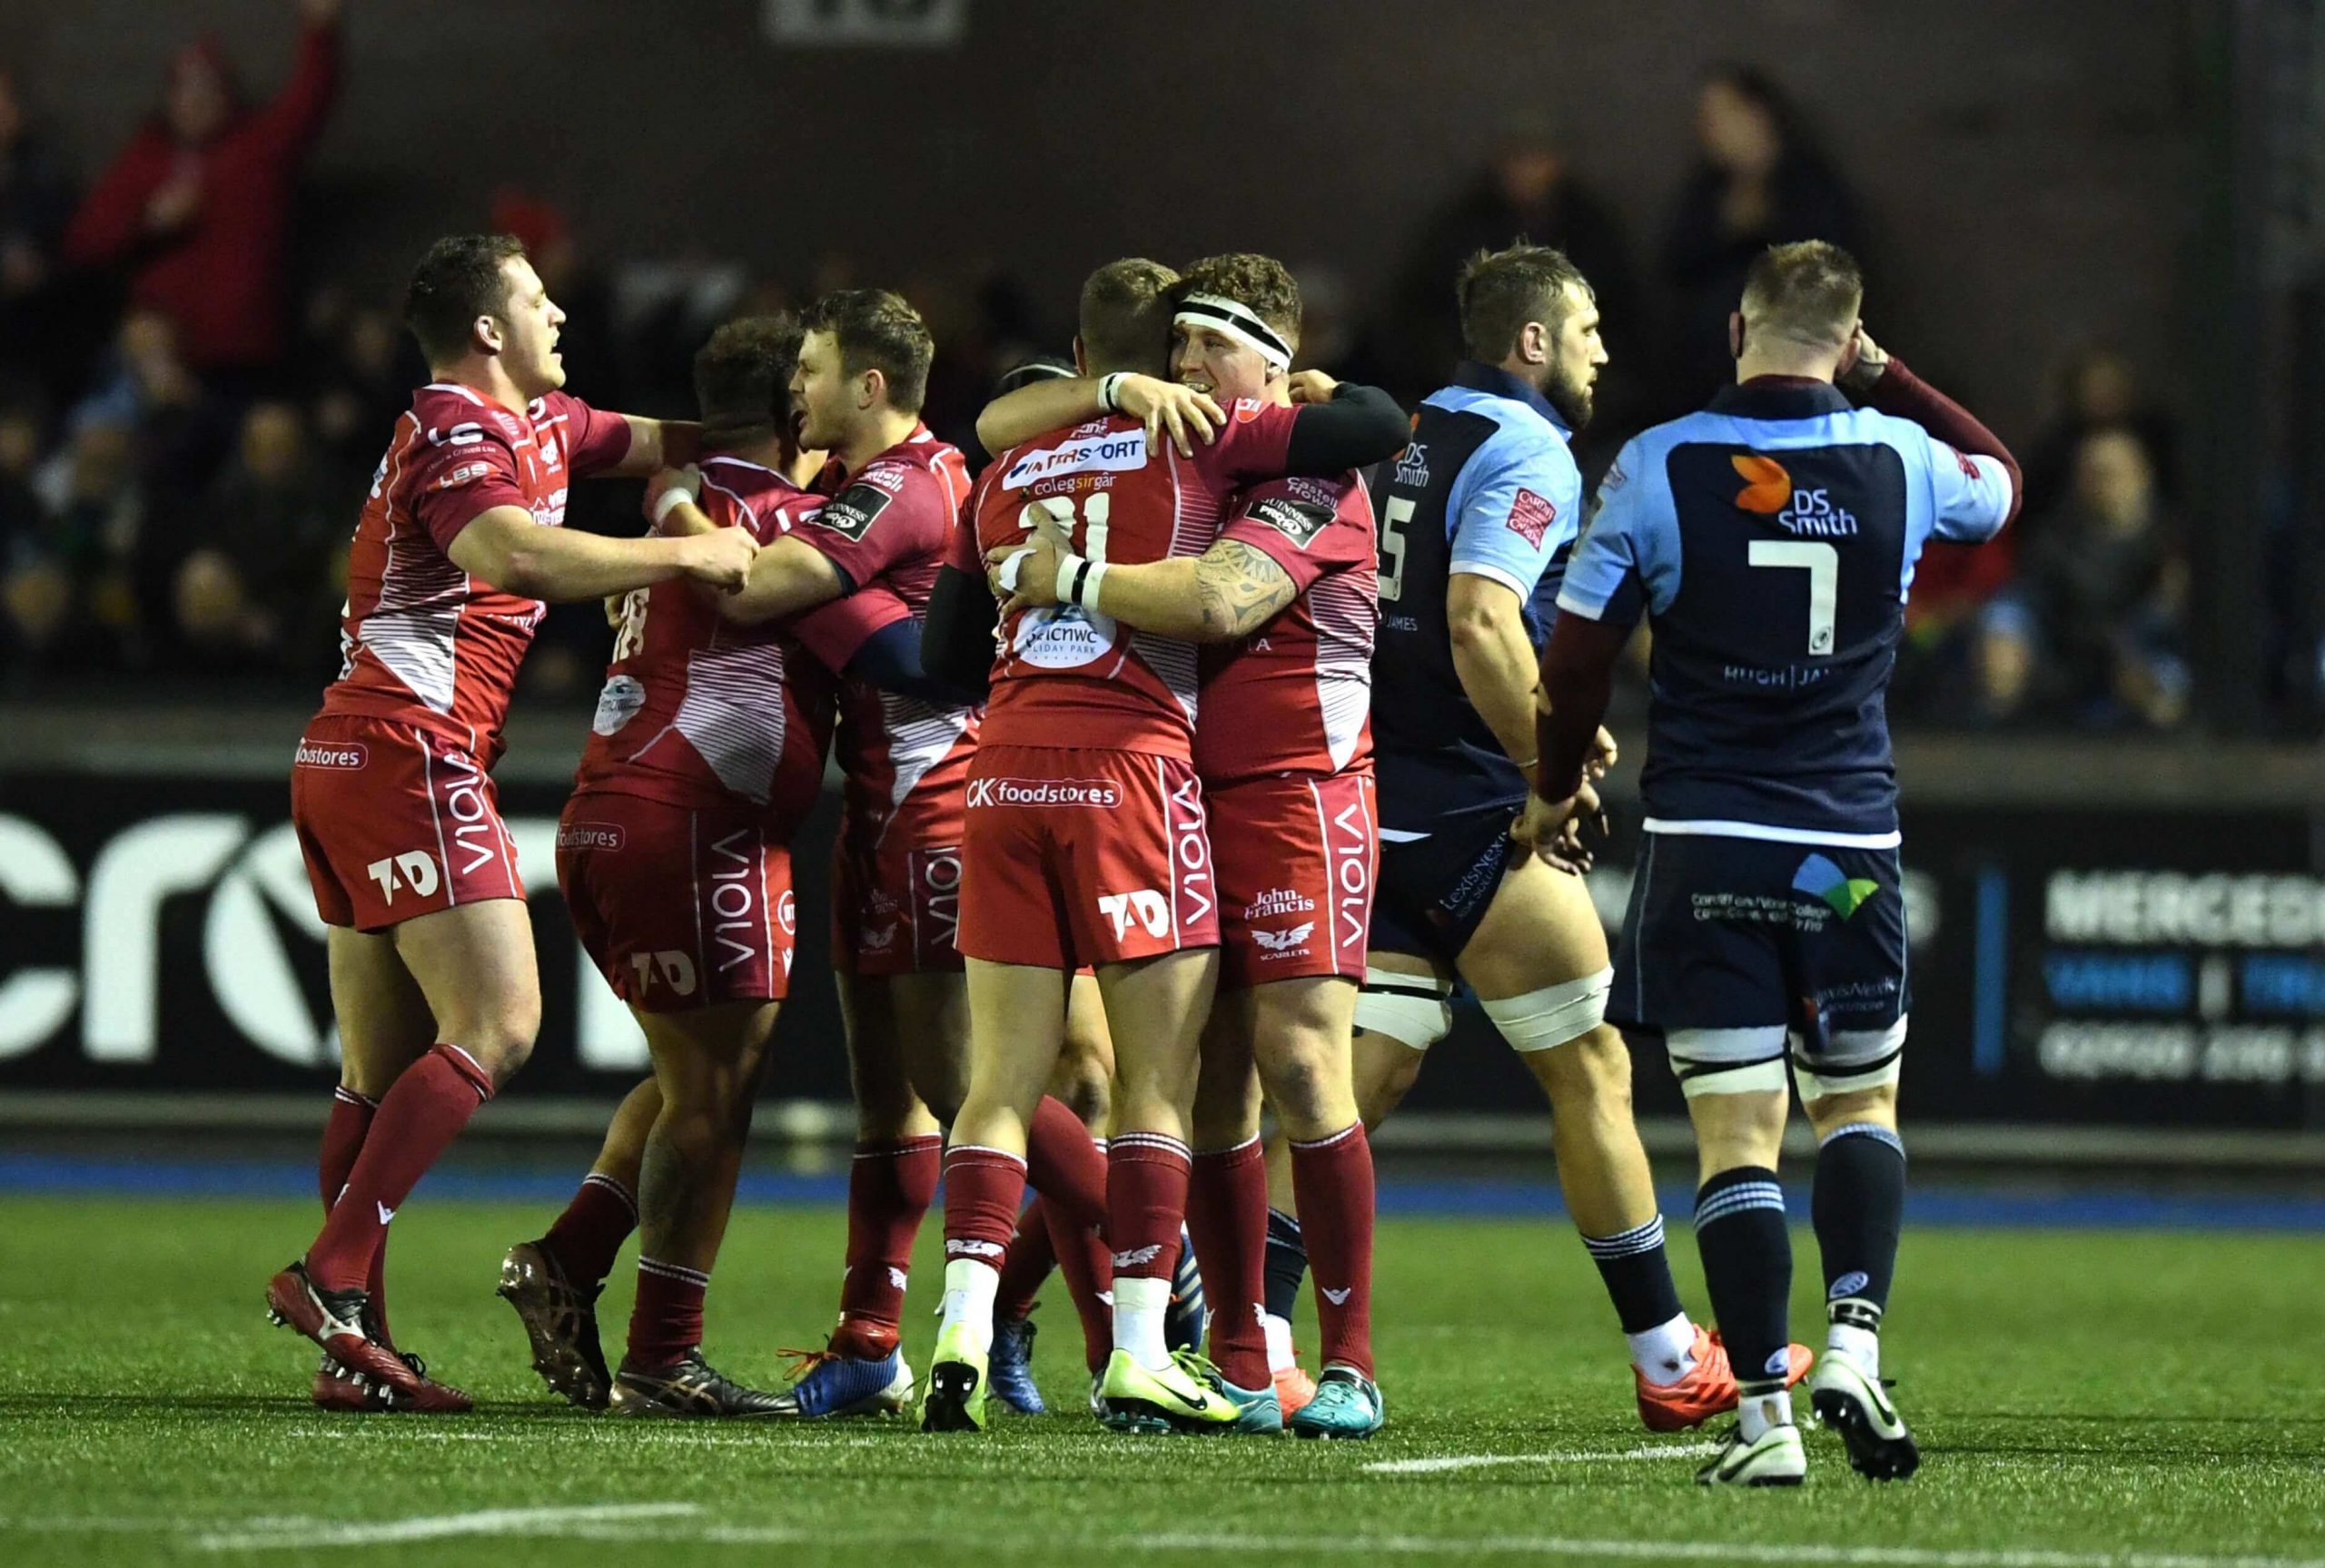 Scarlets to take on Cardiff Blues in PRO14 return - Scarlets Rugby